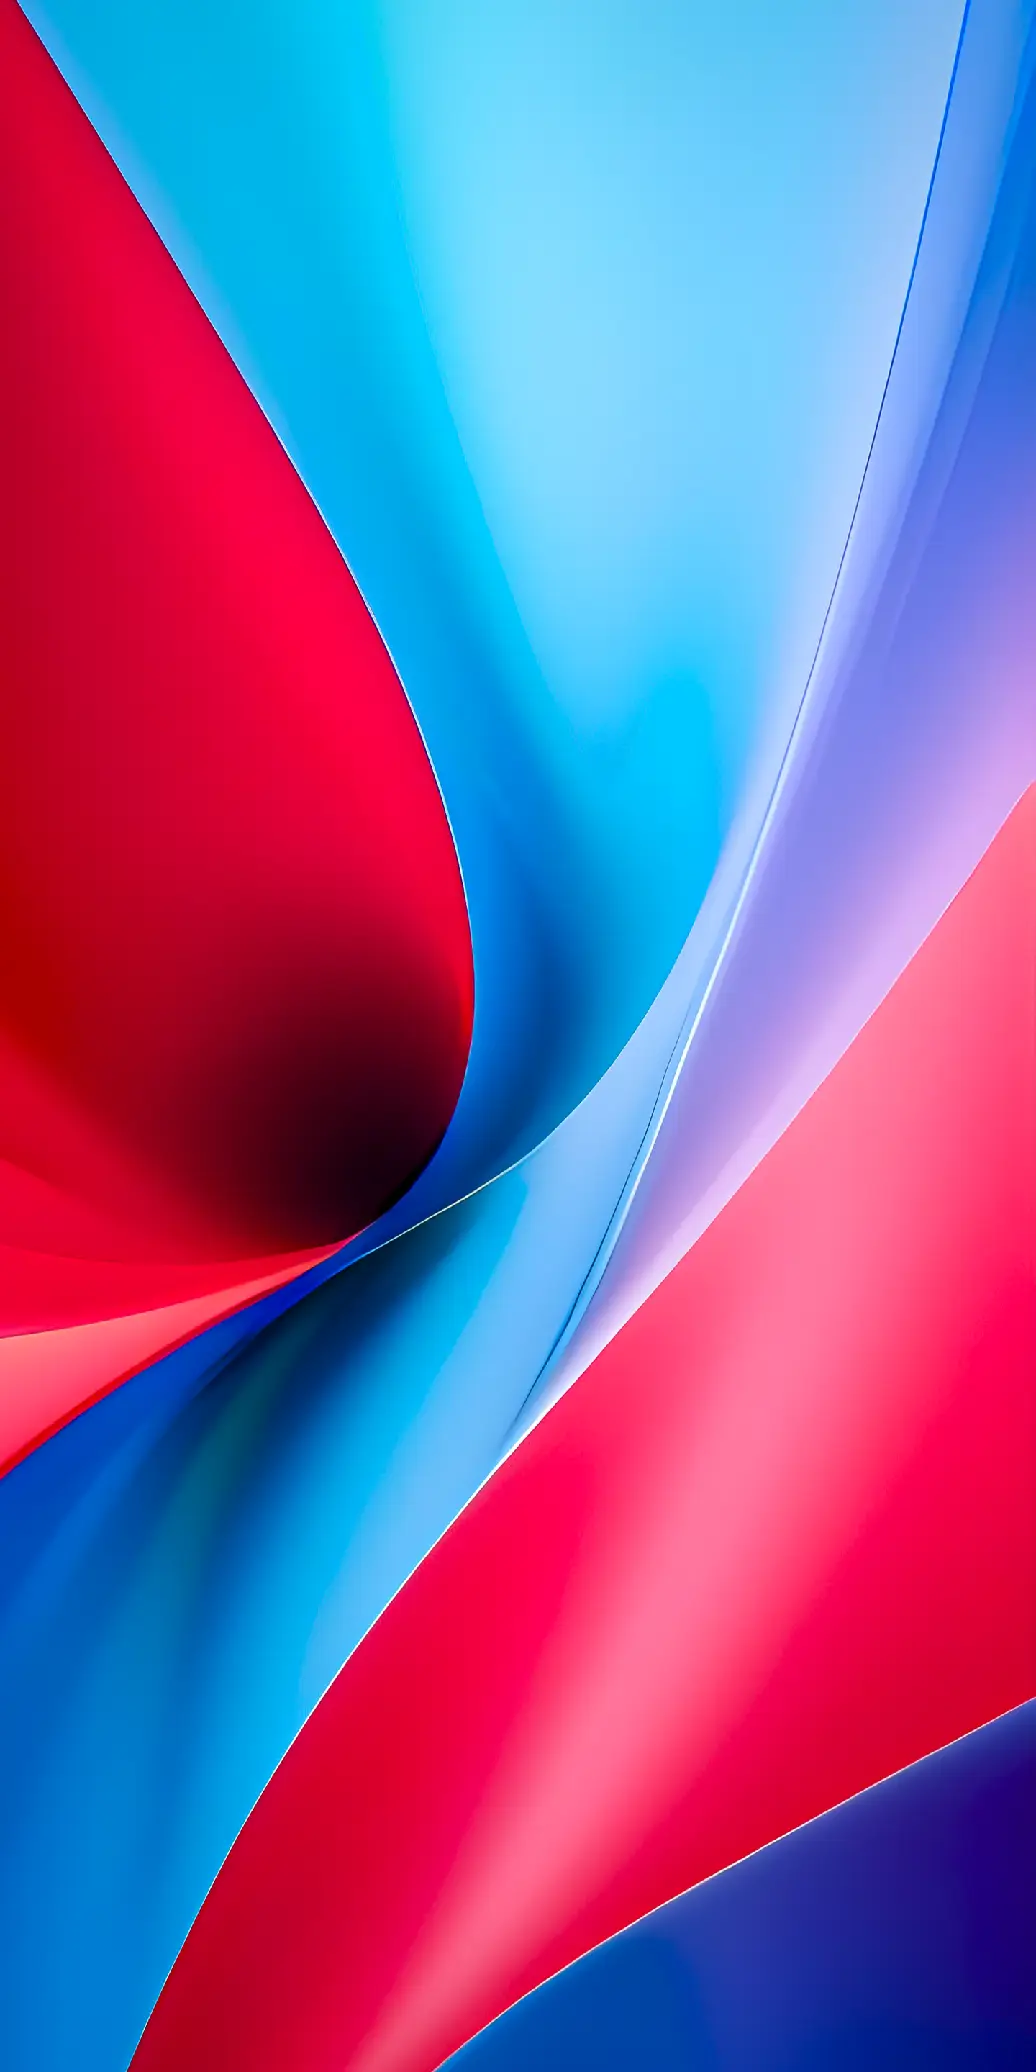 Abstract iPhone wallpaper - 071